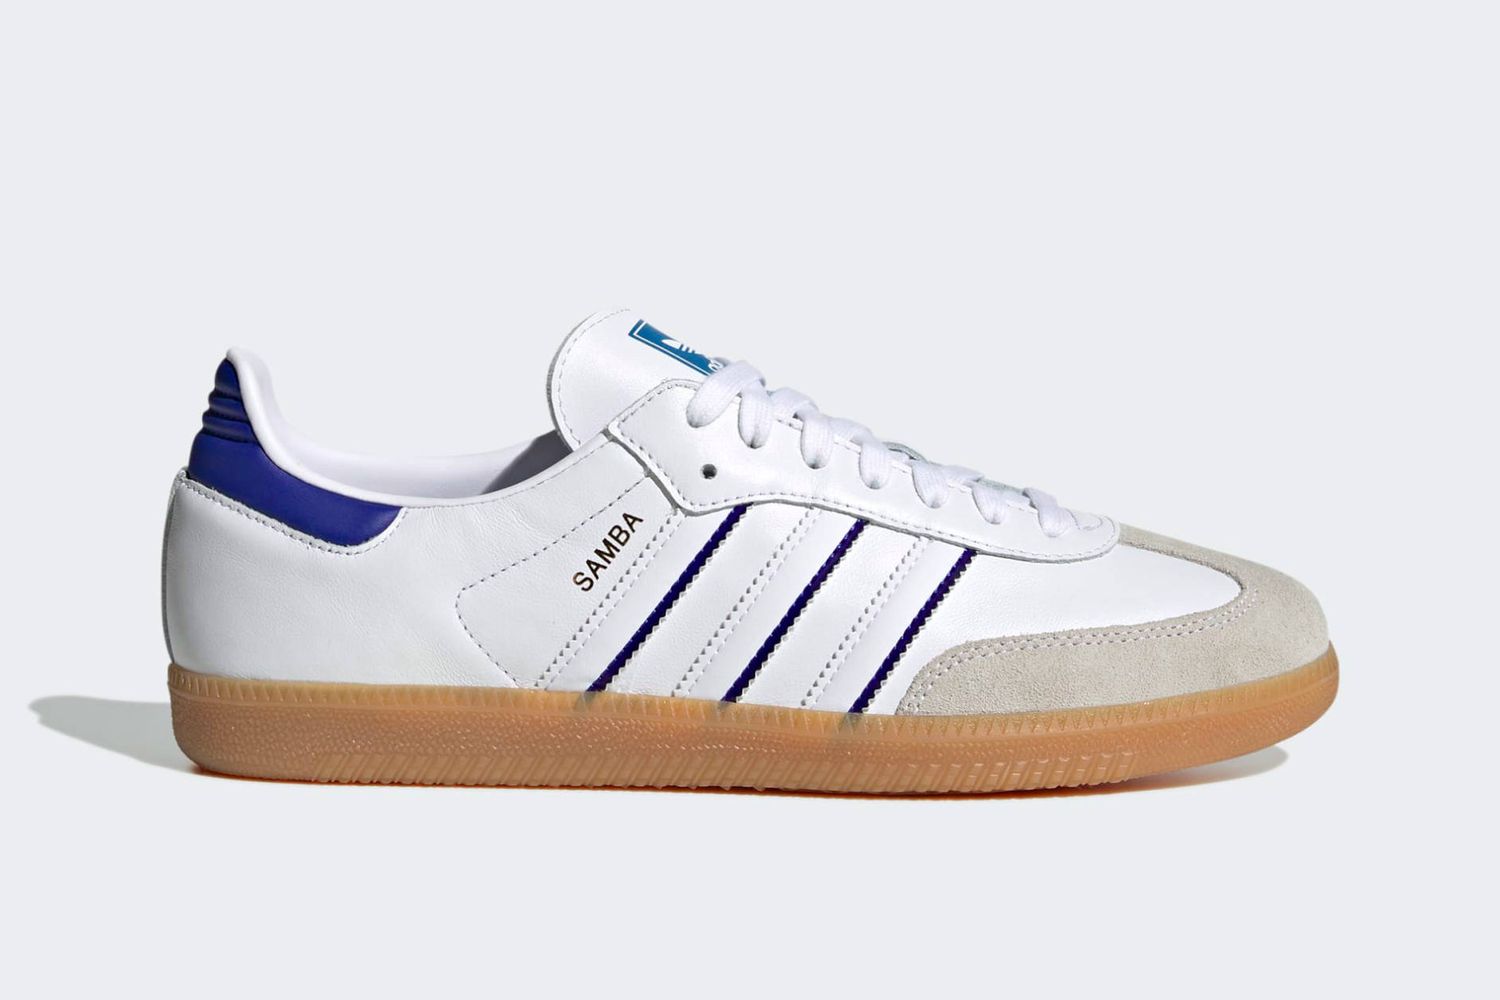 adidas Samba: 8 of the Best to Buy in 2023